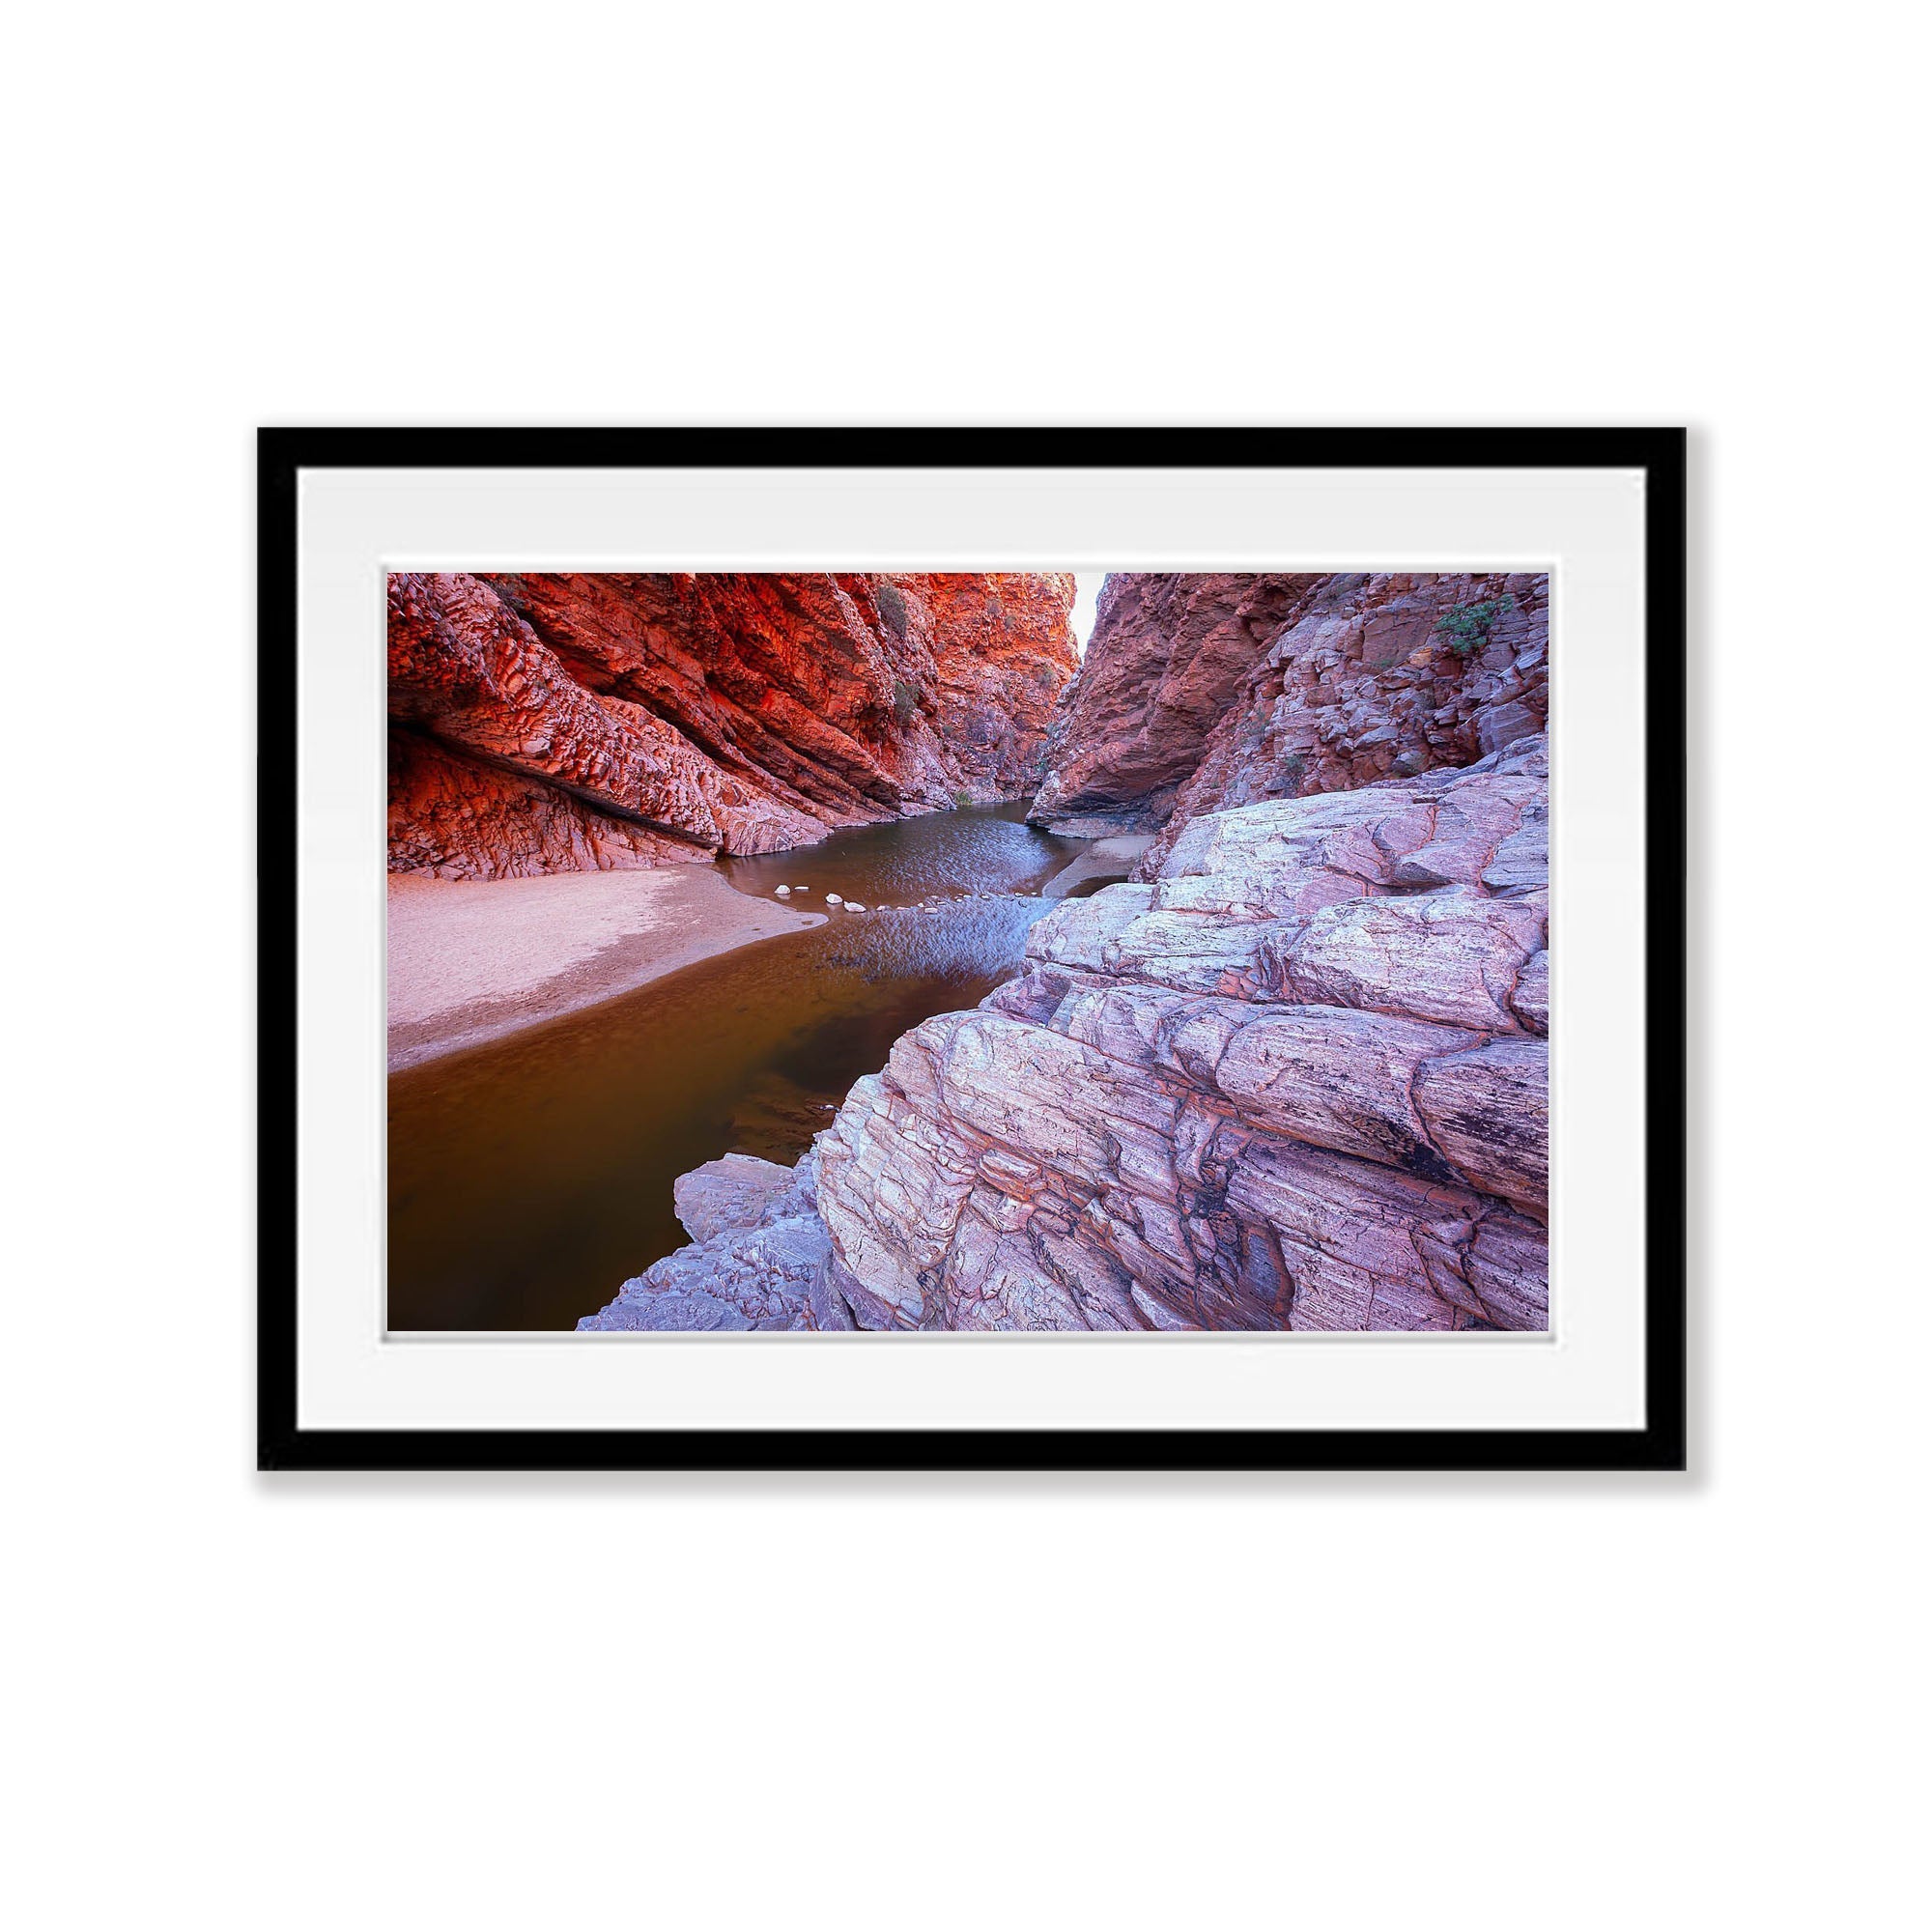 Emily Gap, West MacDonnell Ranges - Northern Territory